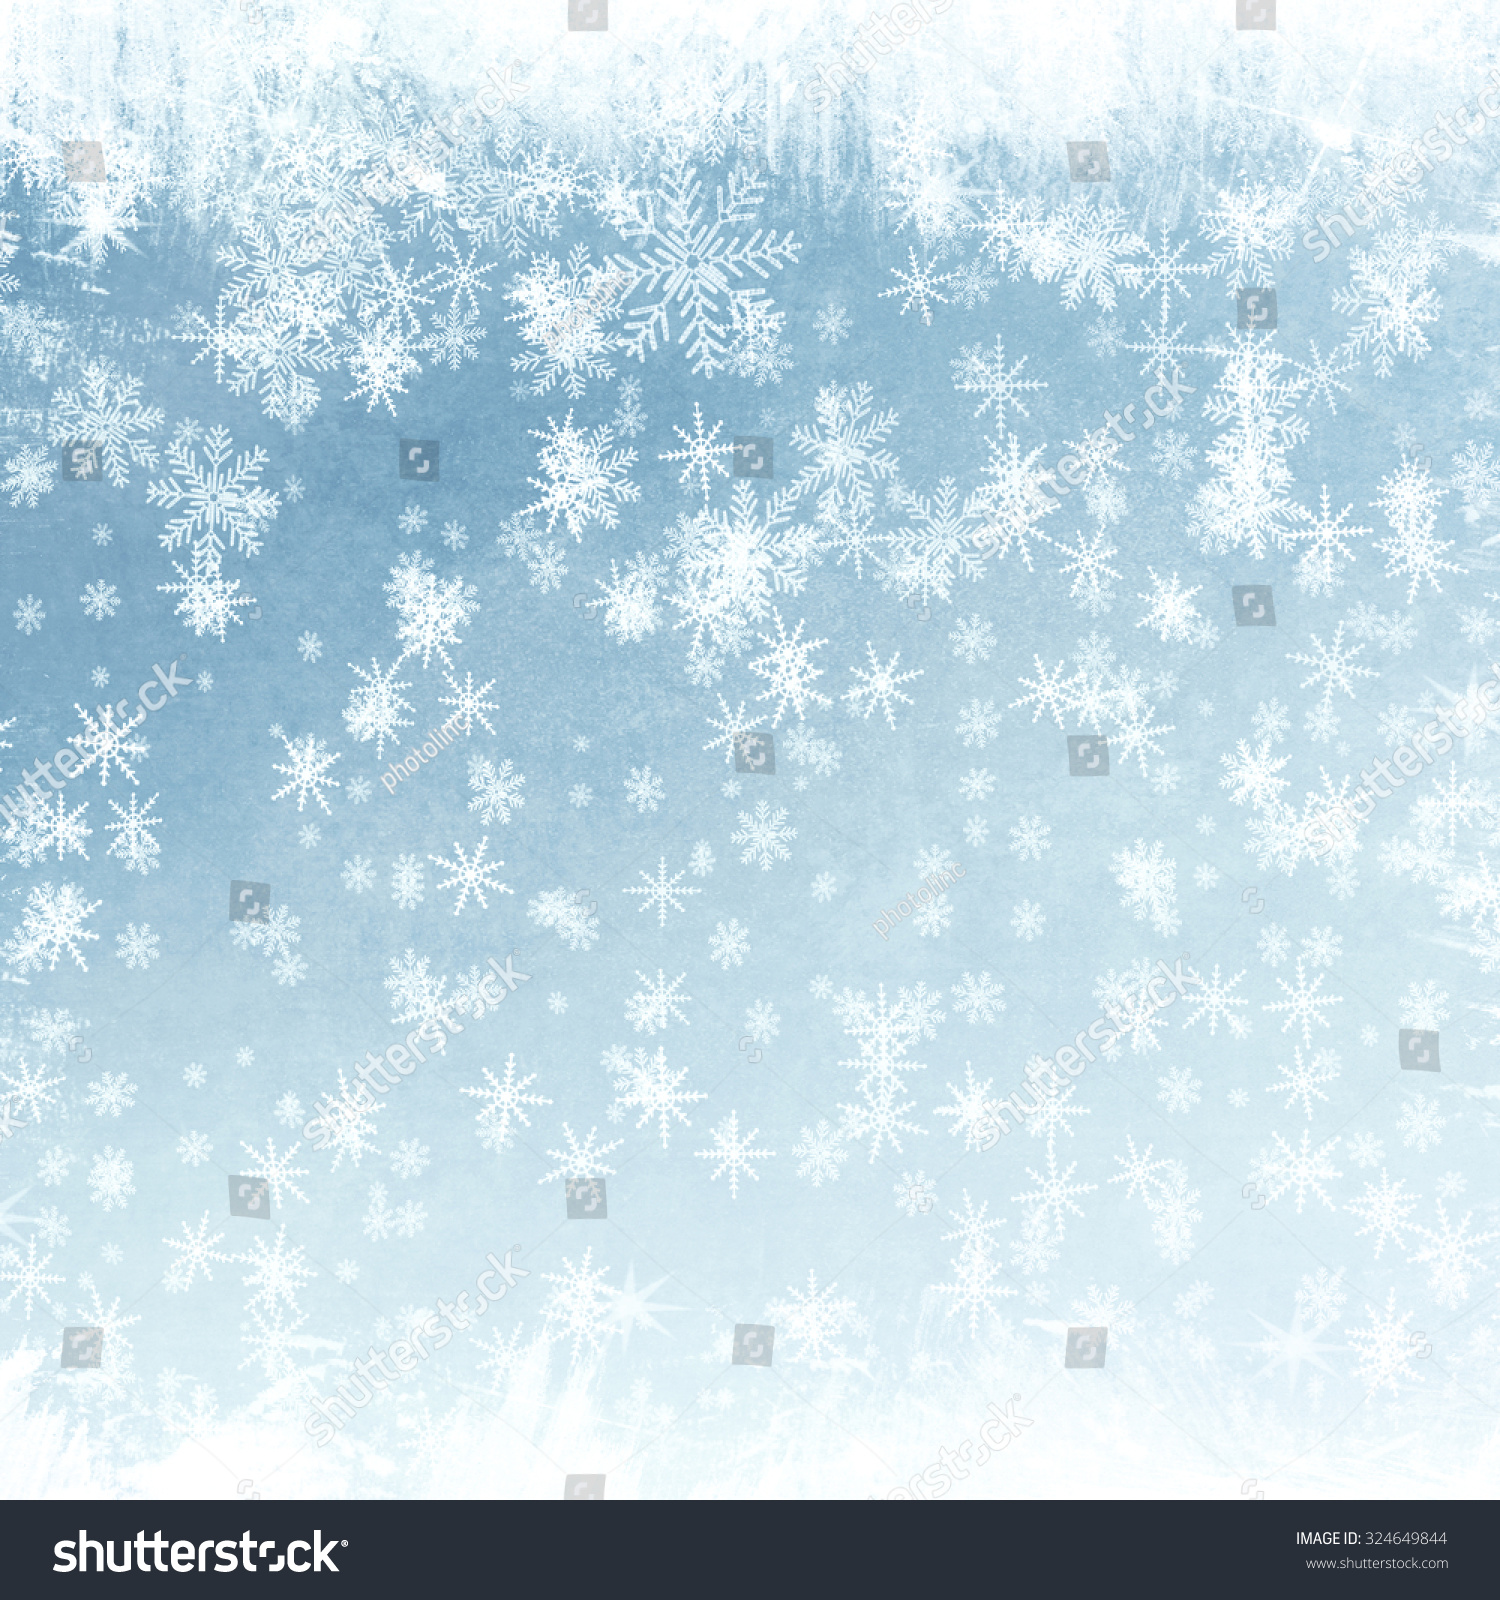 Abstract snowflake background for Your design #324649844